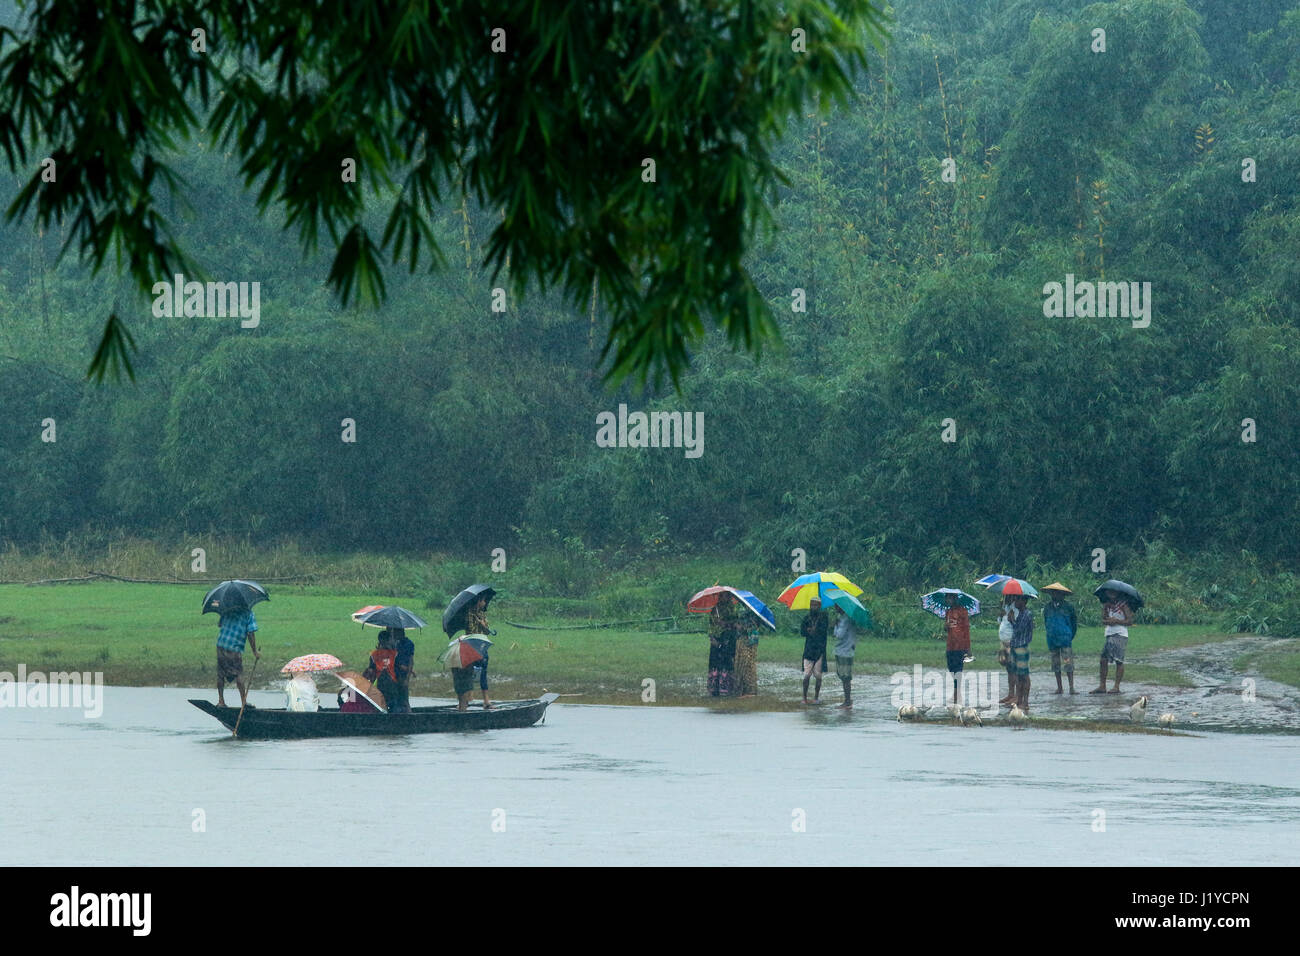 Passengers wait for getting up on the boat at the Piain Riverbank during the rainfalls at Gowainghat. Sylhet, Bangladesh. Stock Photo